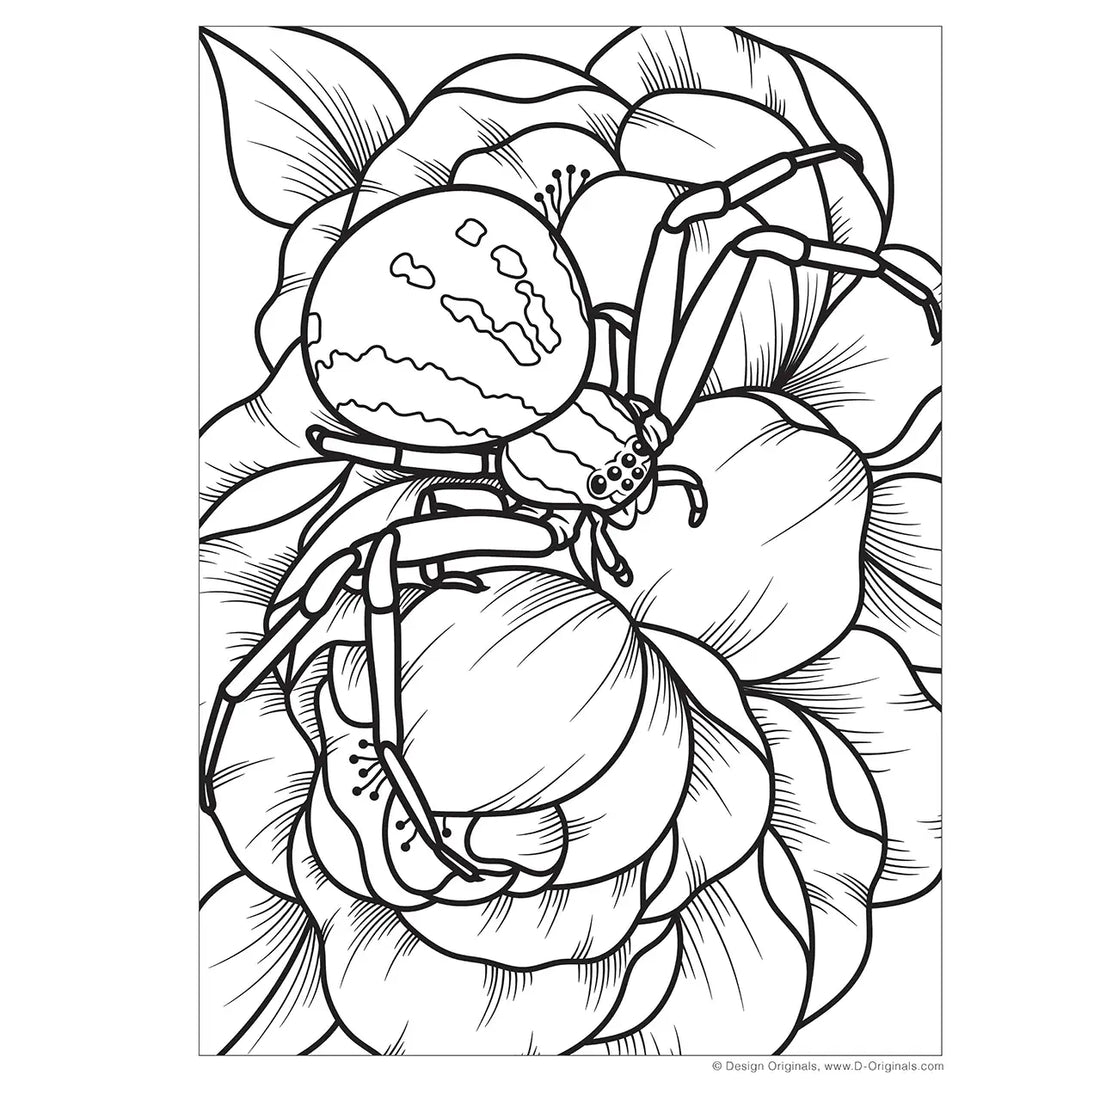 Super Cool Bugs & Spiders Coloring Book Preview #2